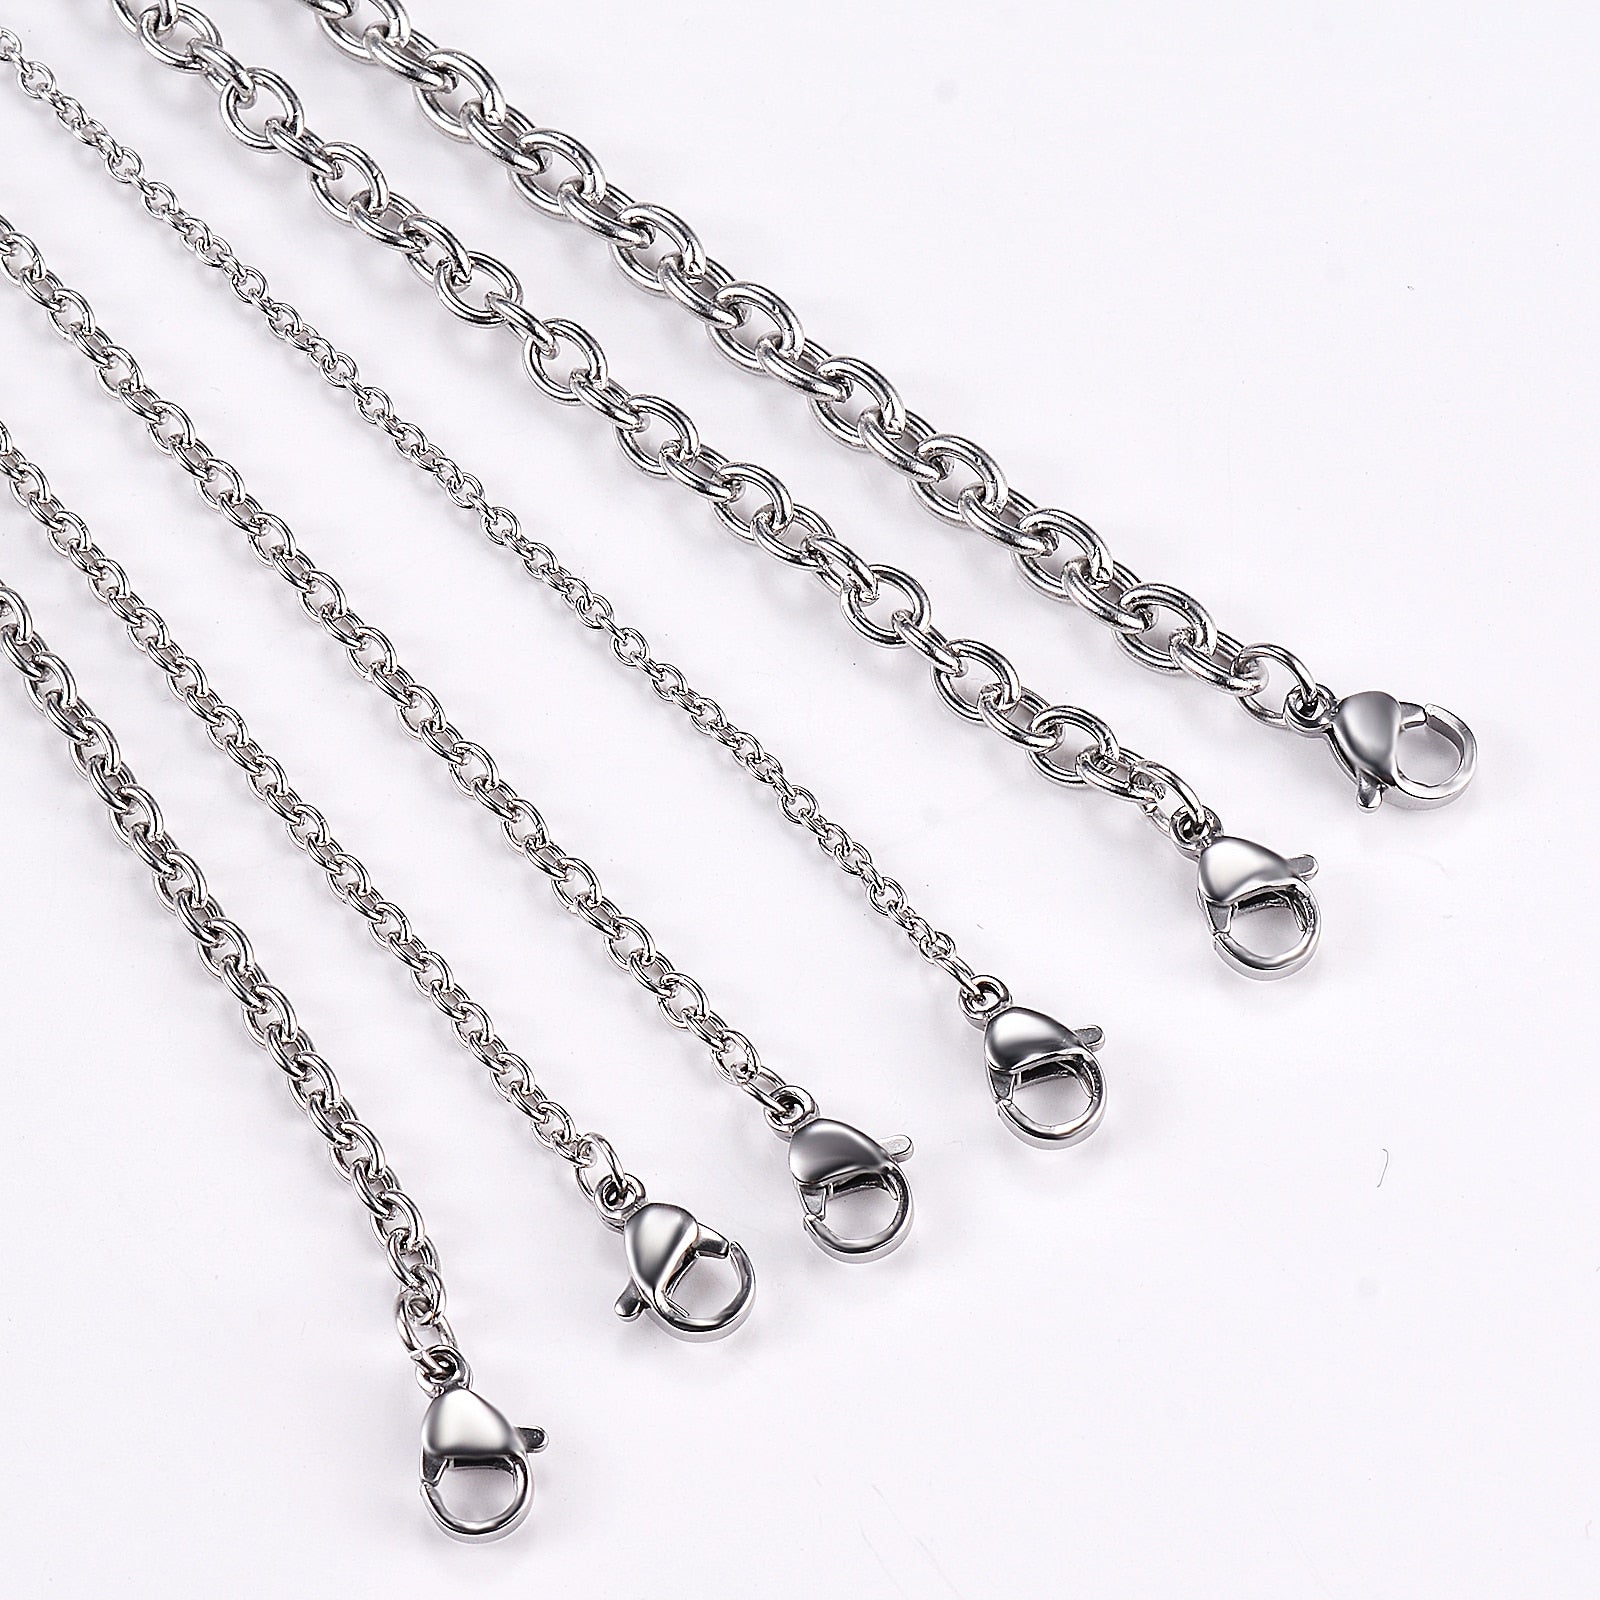 Sophia Stainless Steel Cross Chain Necklace